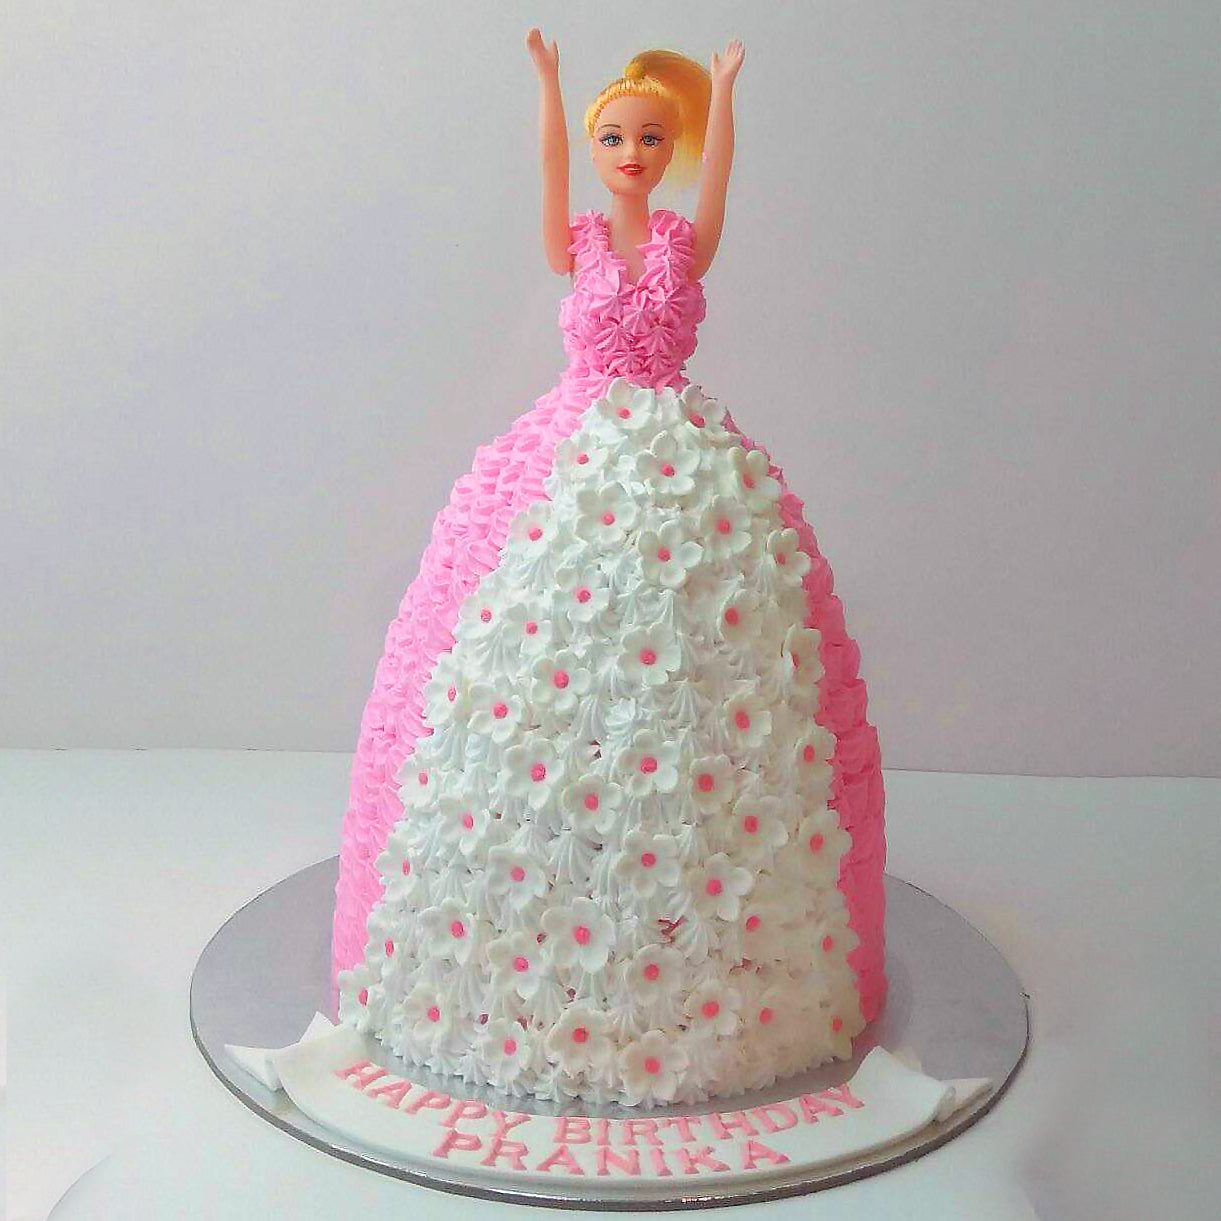 Baby Doll Birthday Cake - CakeCentral.com